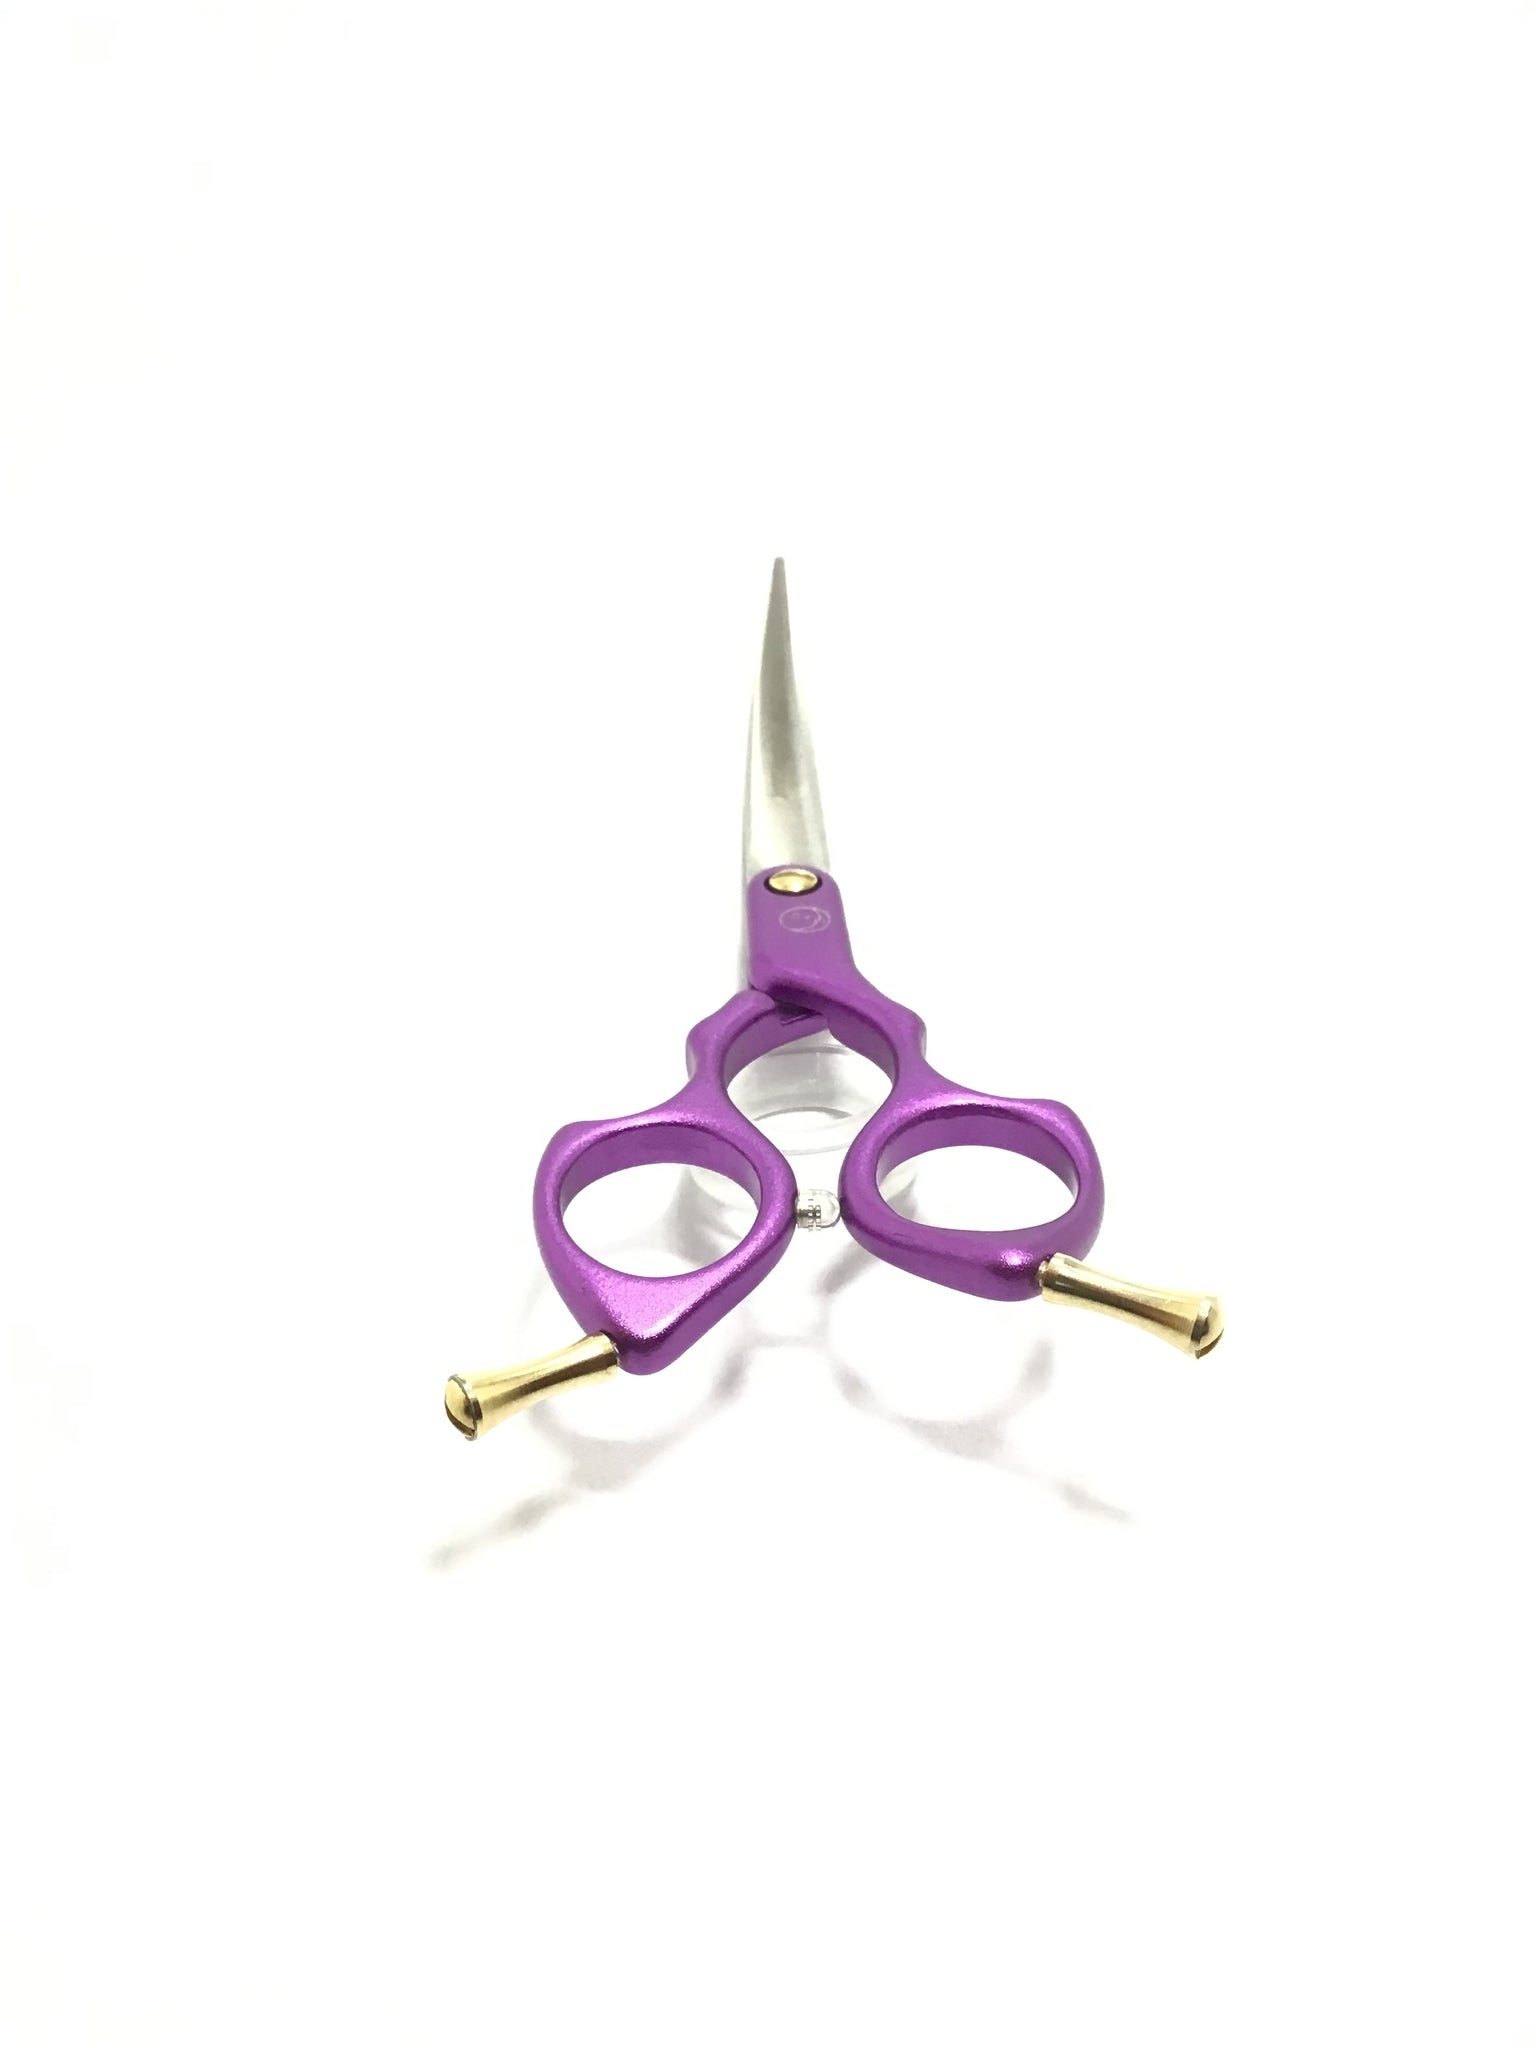 RARE COLLECTIBLE Purple Alzhiemers Association Super Shears by